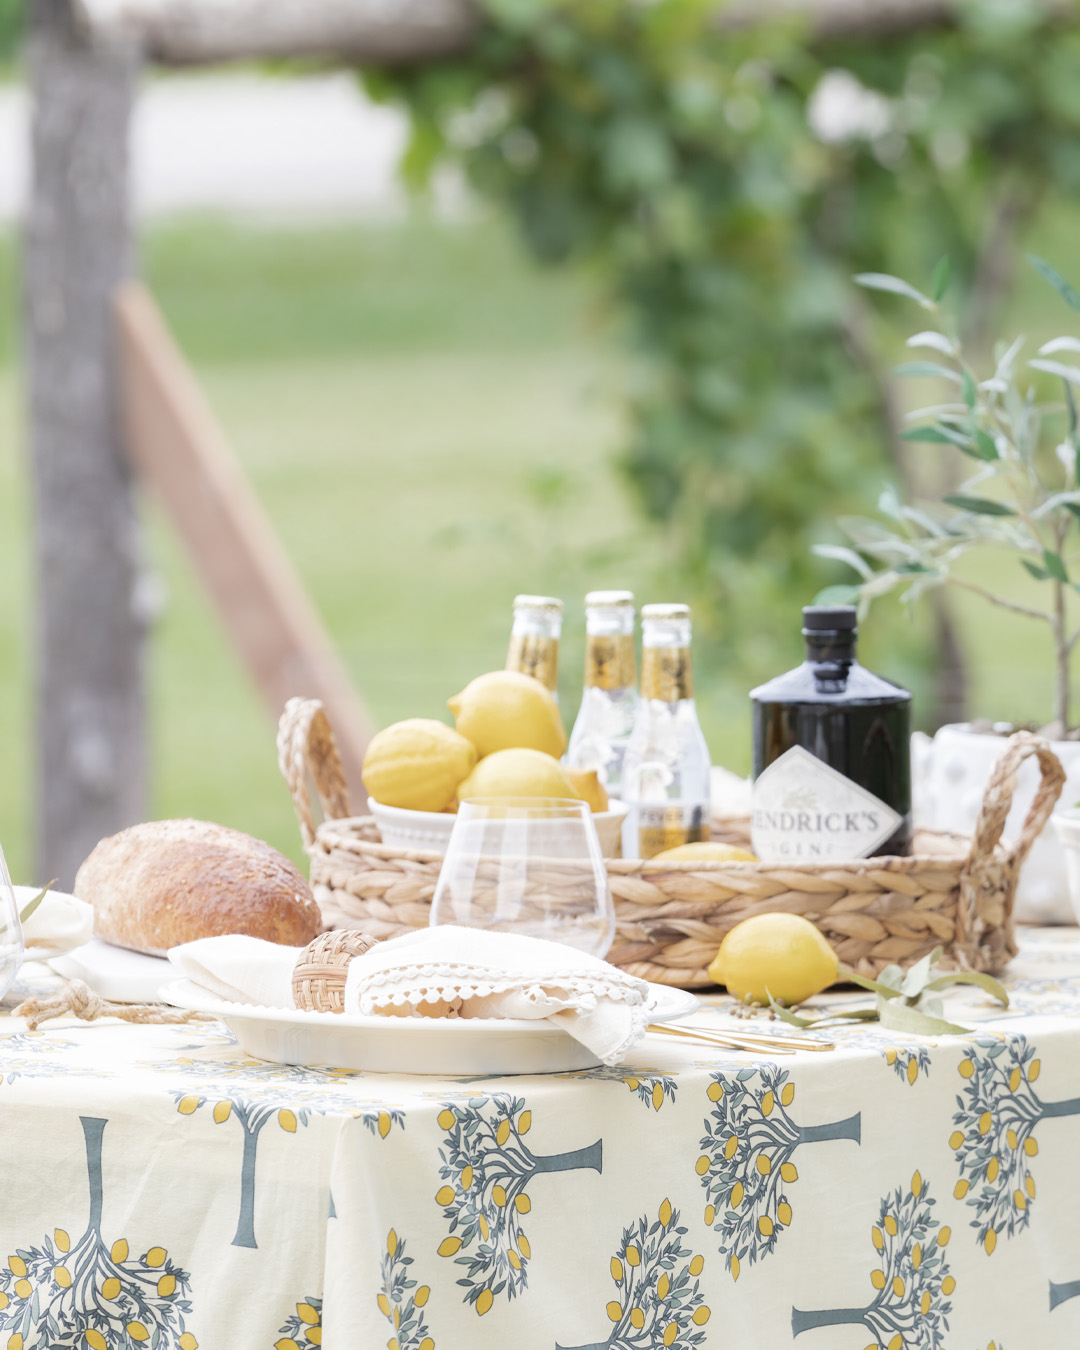 I set up our newly refreshed picnic table the other day in our freshly-tidied garden with the most lovely summer table linen finds from my friends at Kochi Stores. Please enjoy these photos of our picnic in the garden!